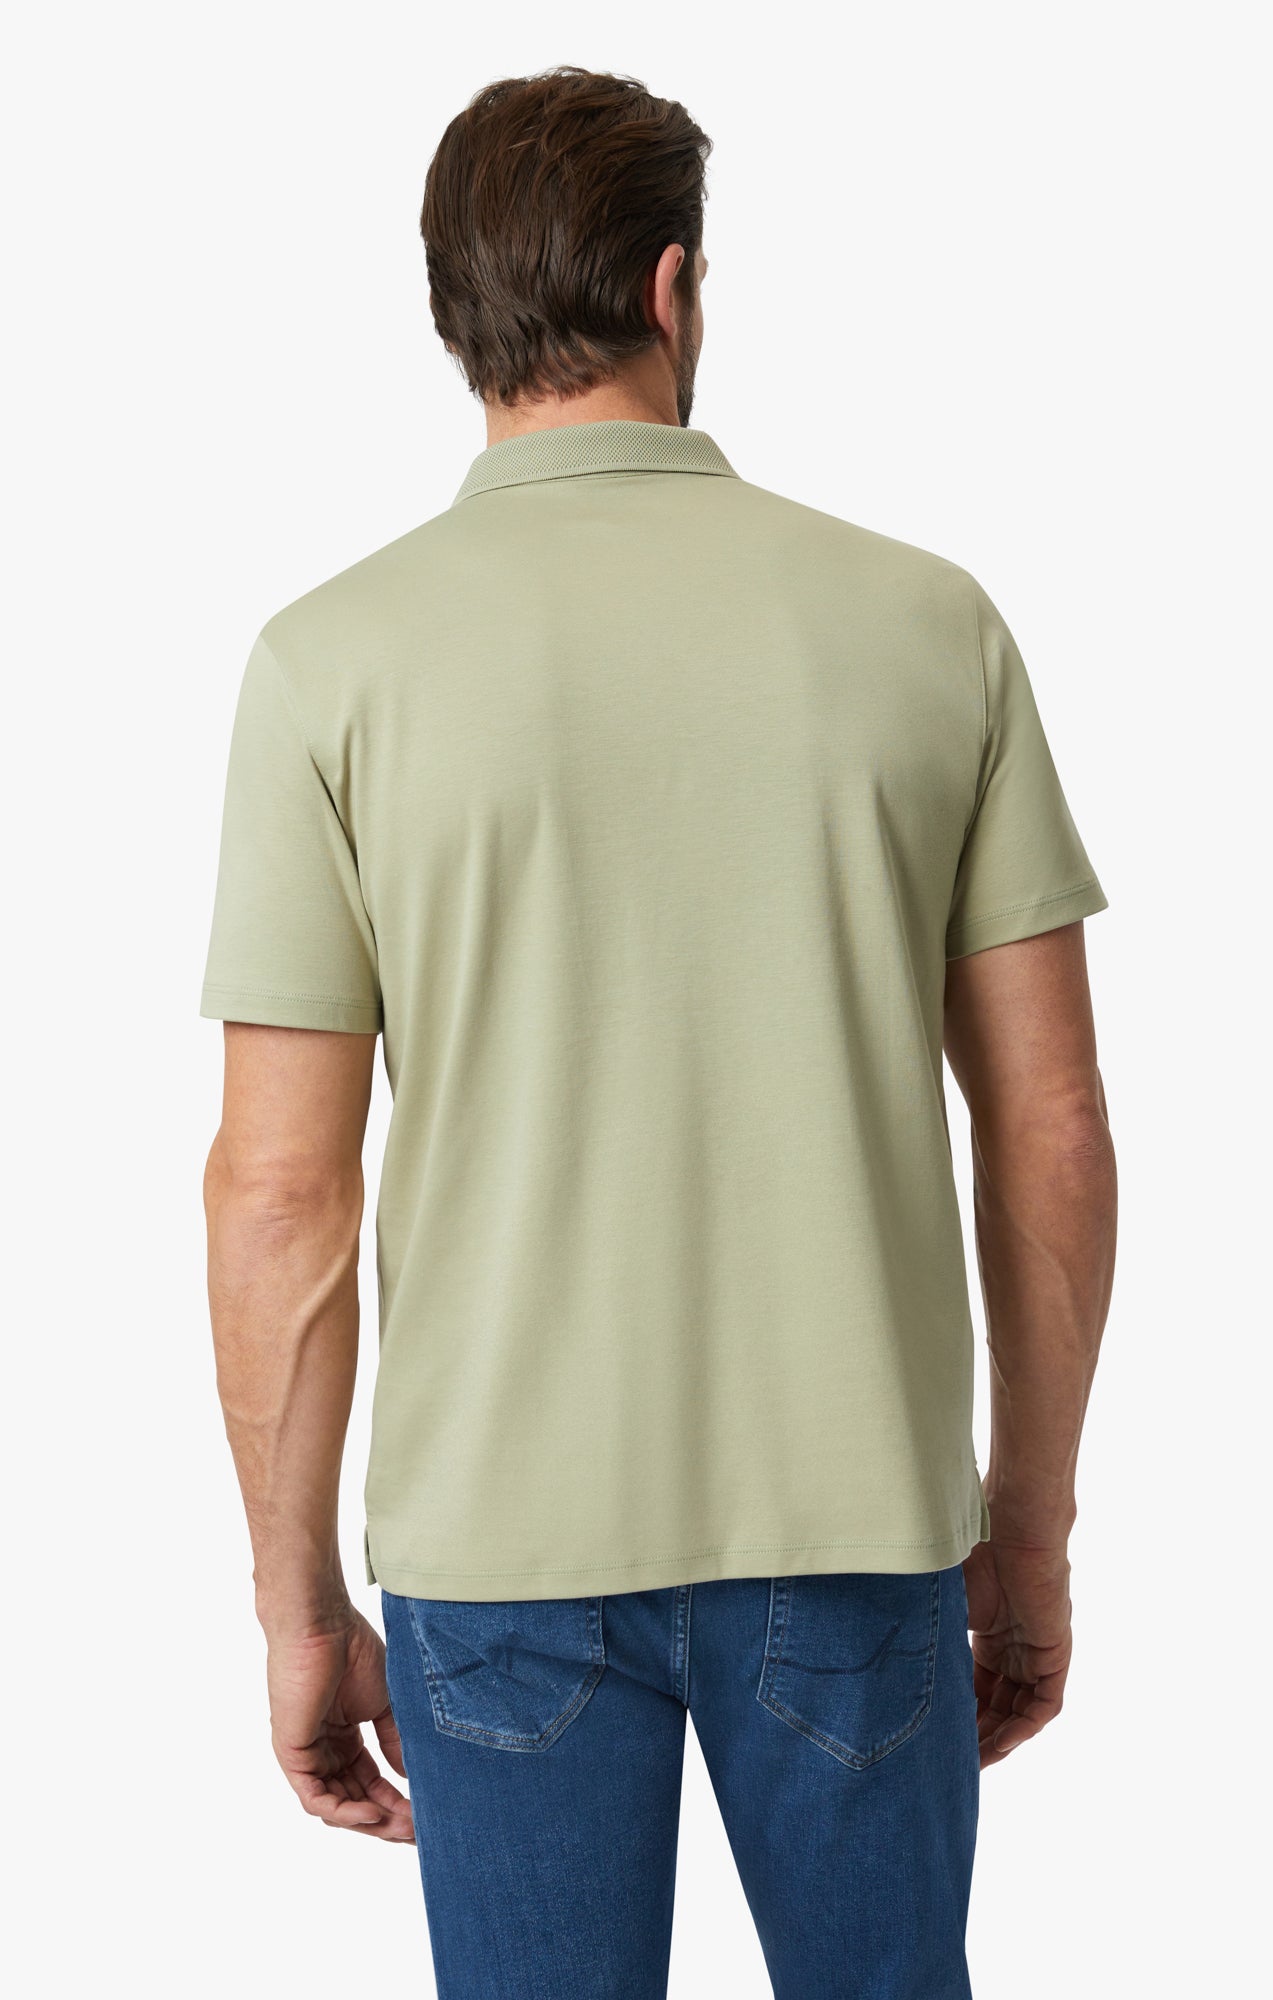 Polo T-Shirt In Sage